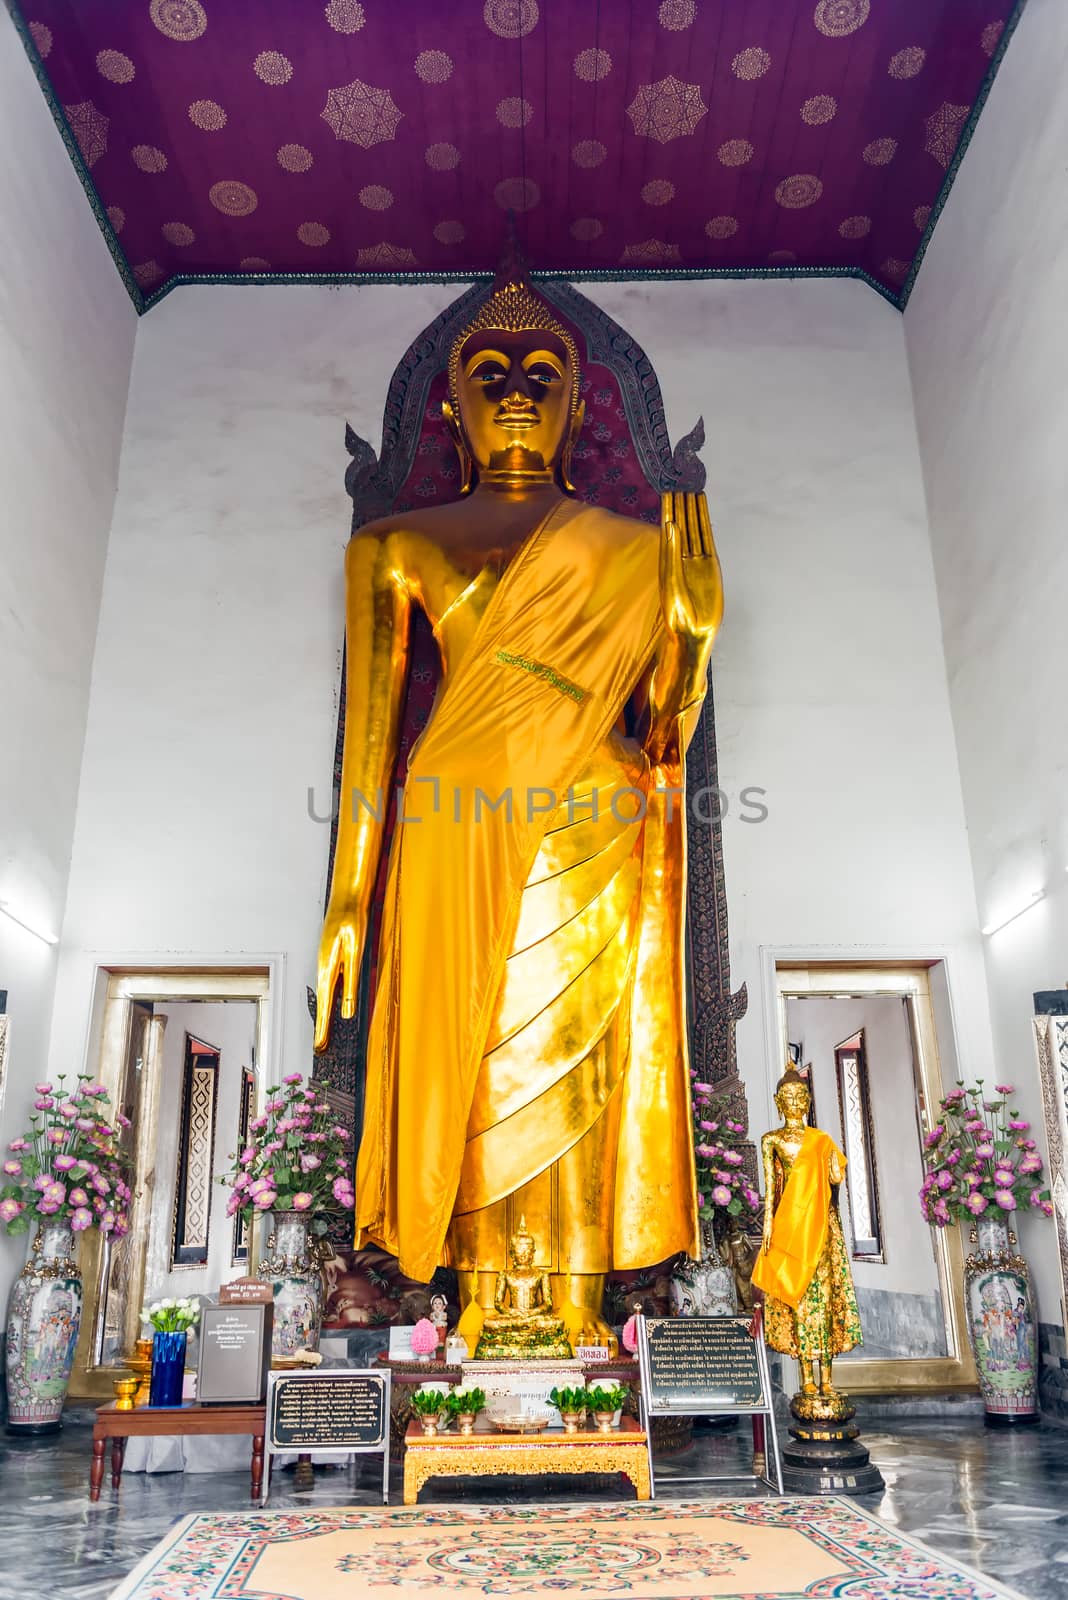 View of the altar in the Buddhist temple of Thailand - the god Buddha on the altar